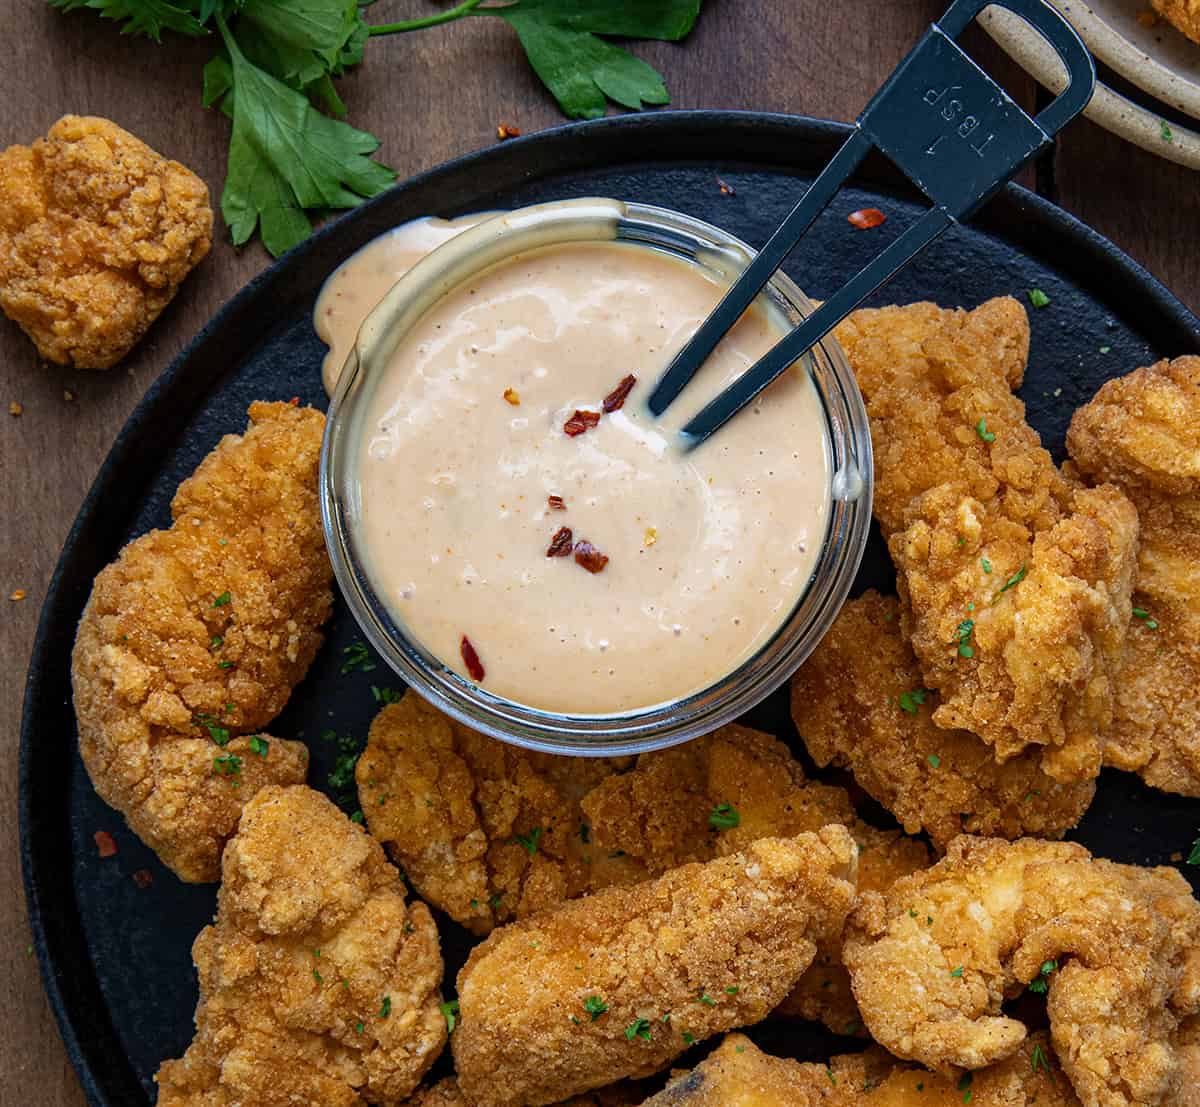 Jar of Creamy Honey Mustard Sauce on a plate filled with crispy chicken tenders.